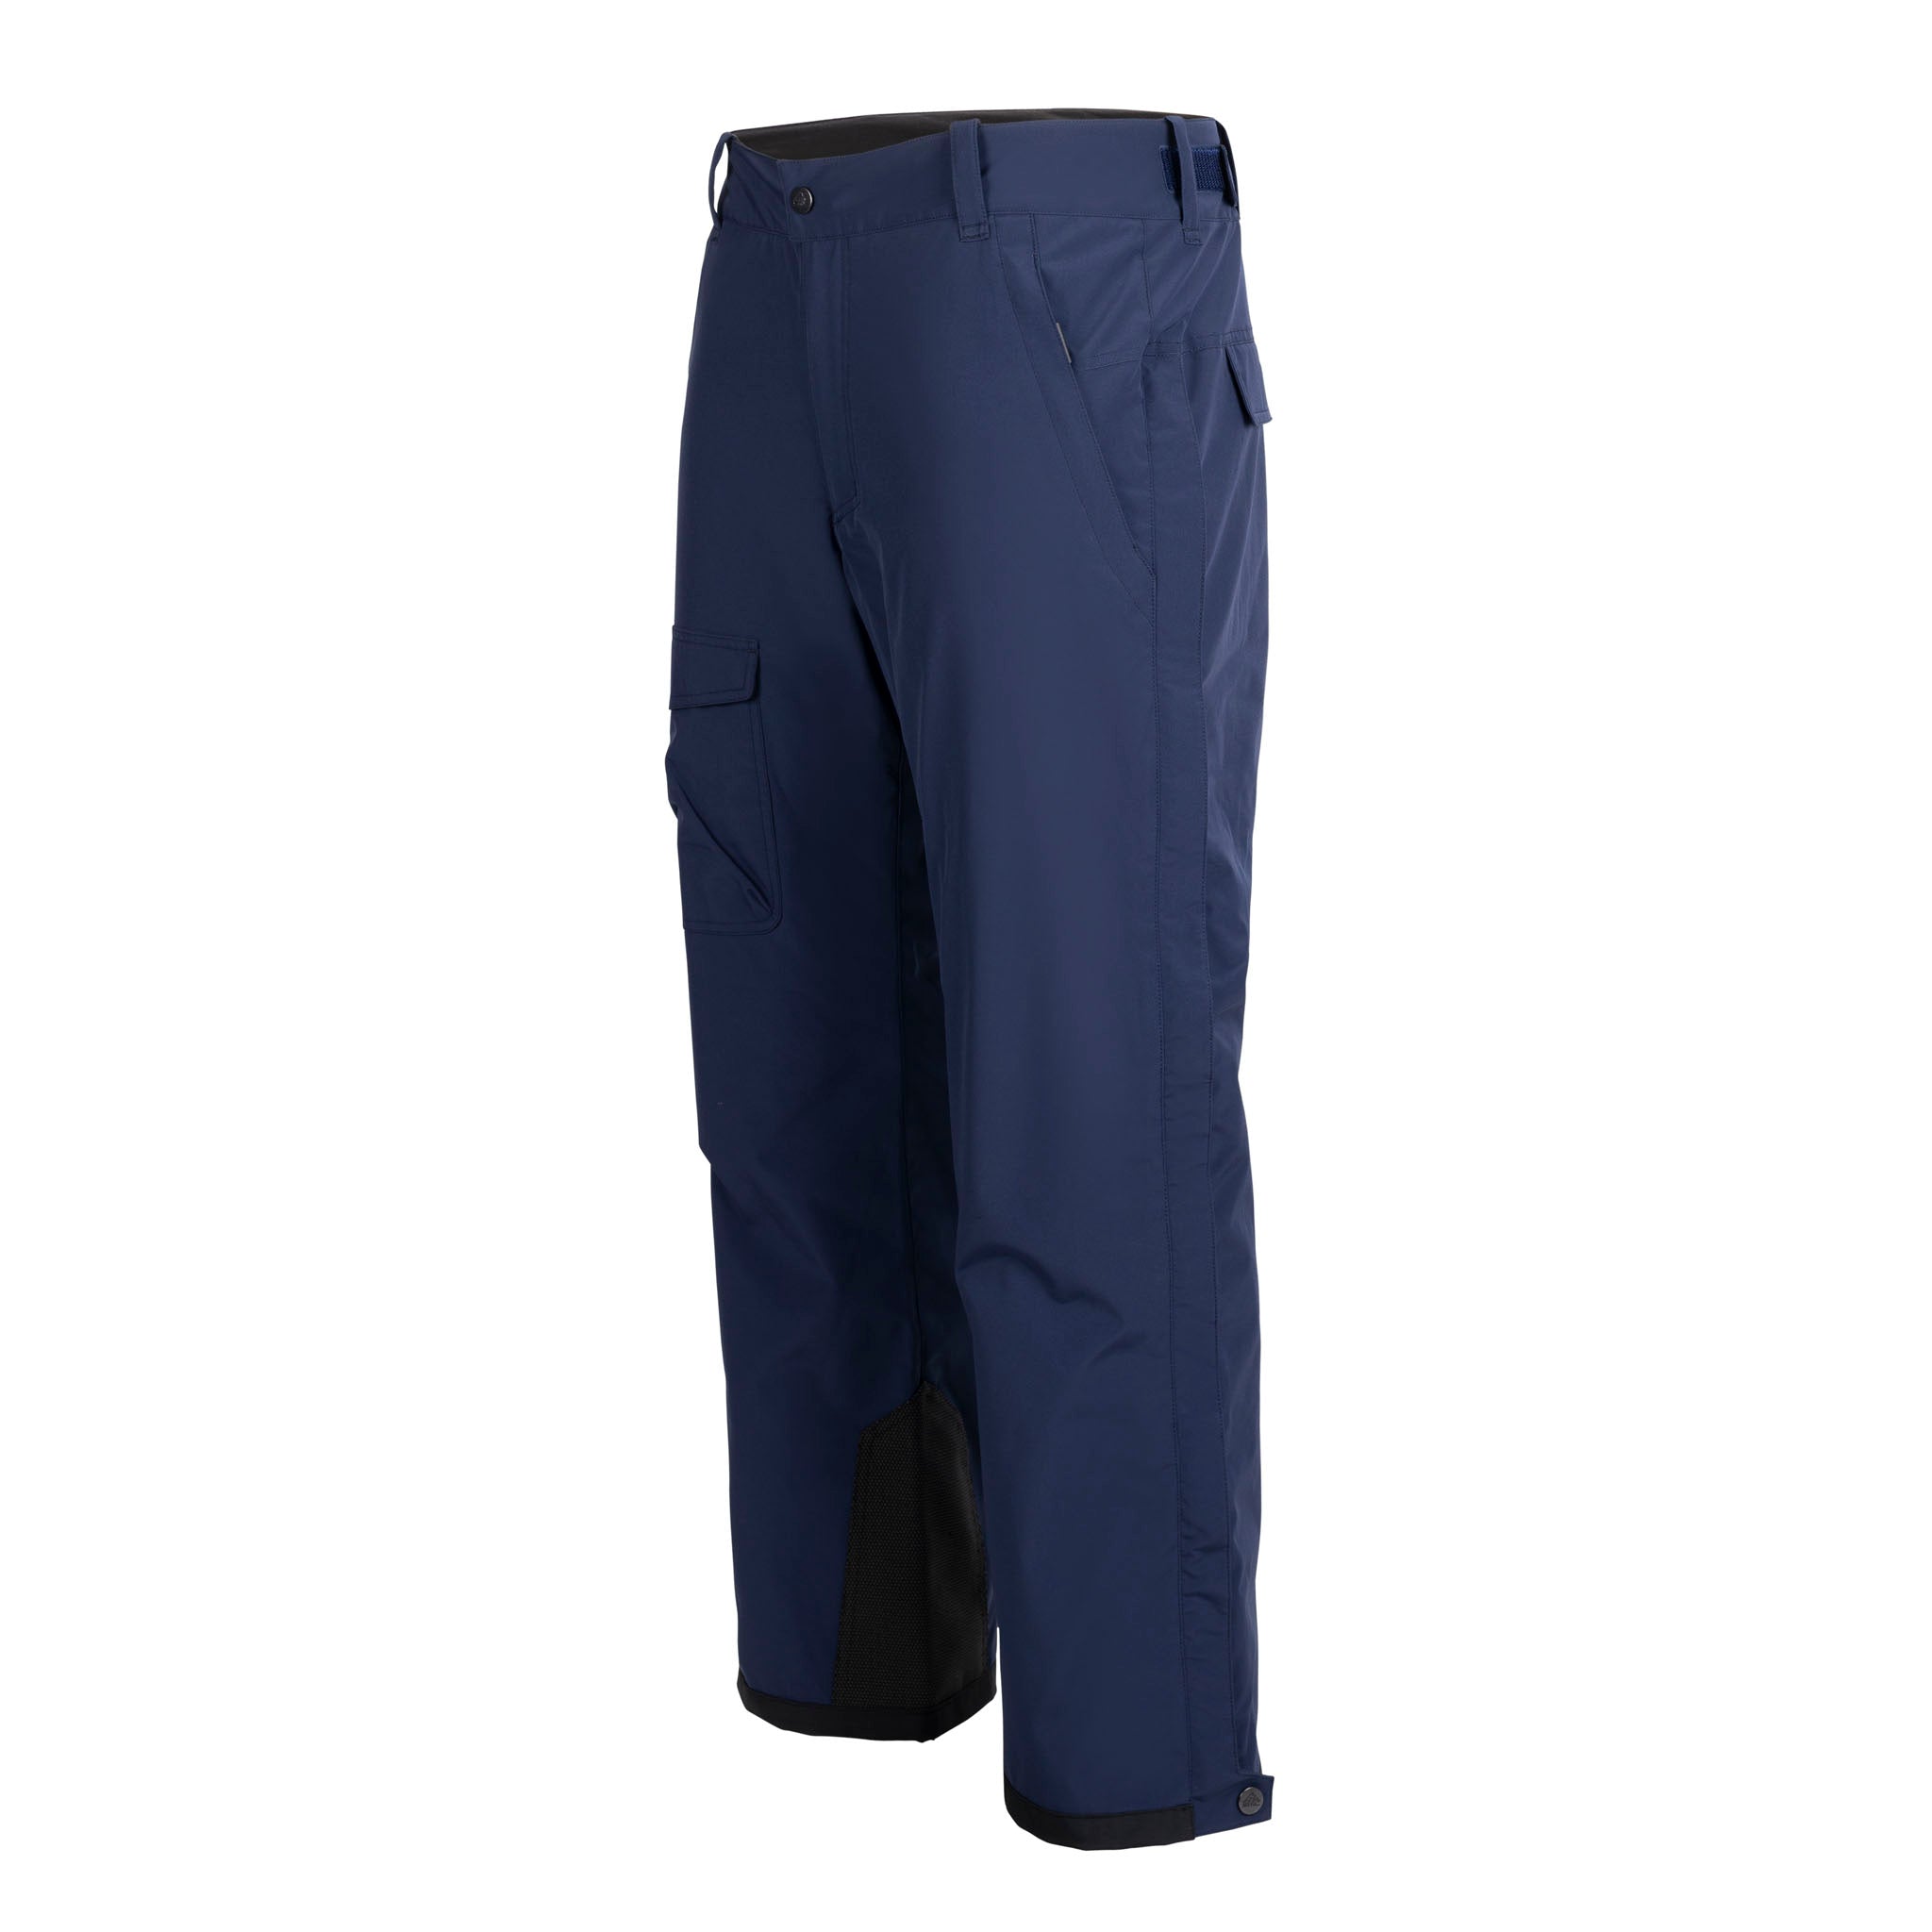 EasyStep: Re-Thinking Side Zip Pants – SYNC Performance